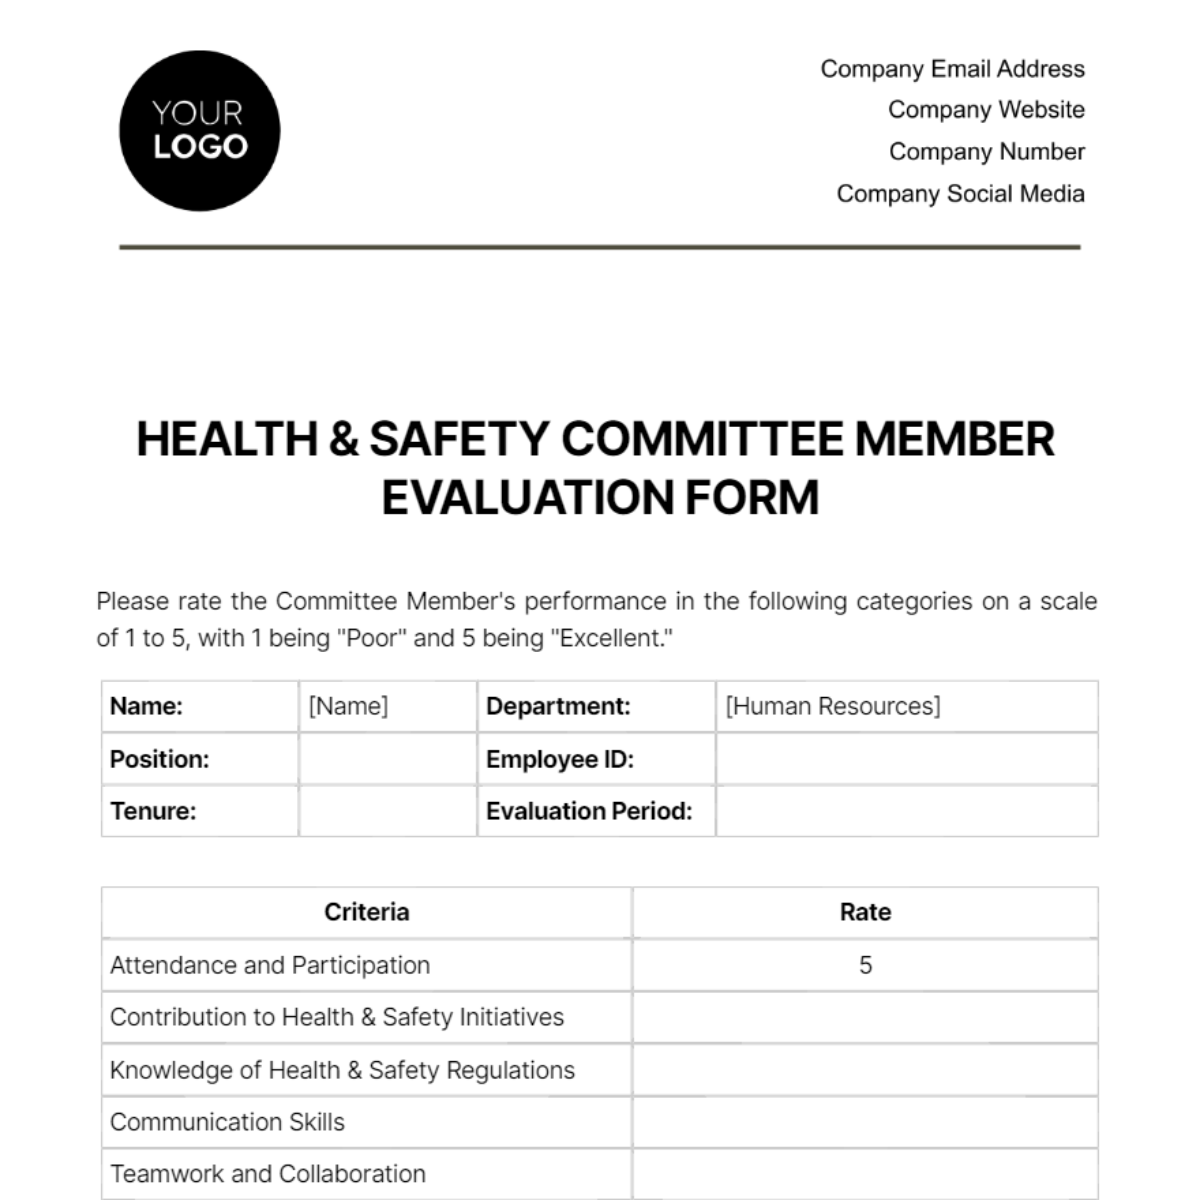 Health & Safety Committee Member Evaluation Form Template